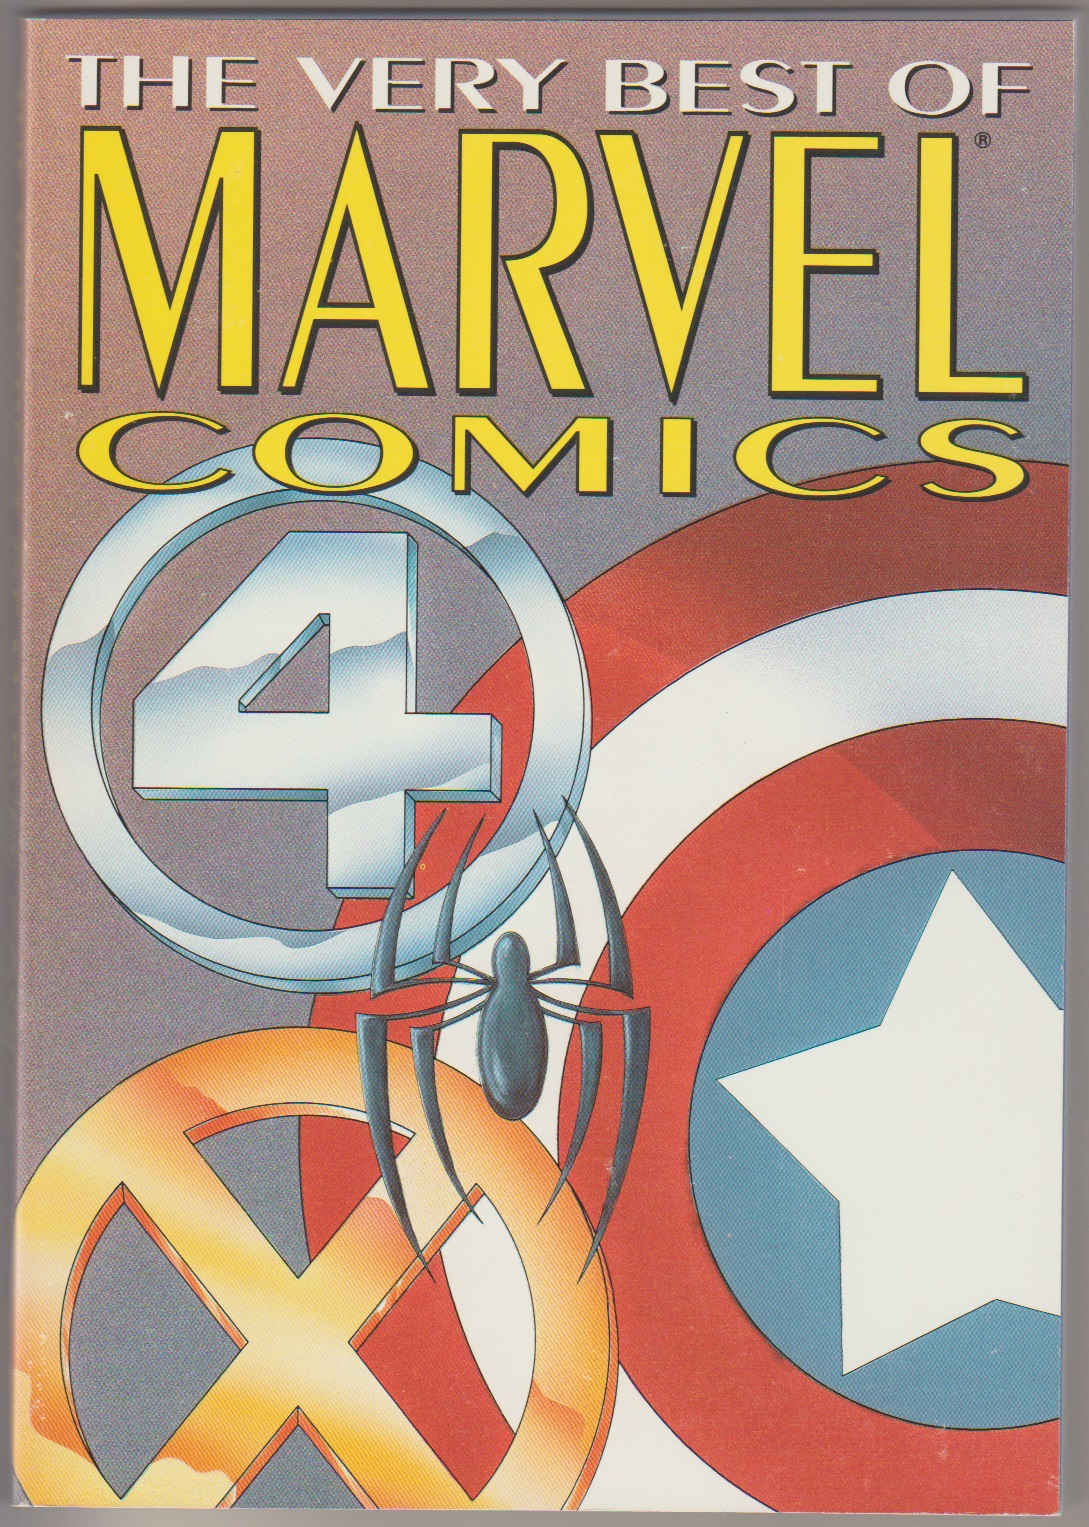 The Very Best of Marvel Comics Paperback